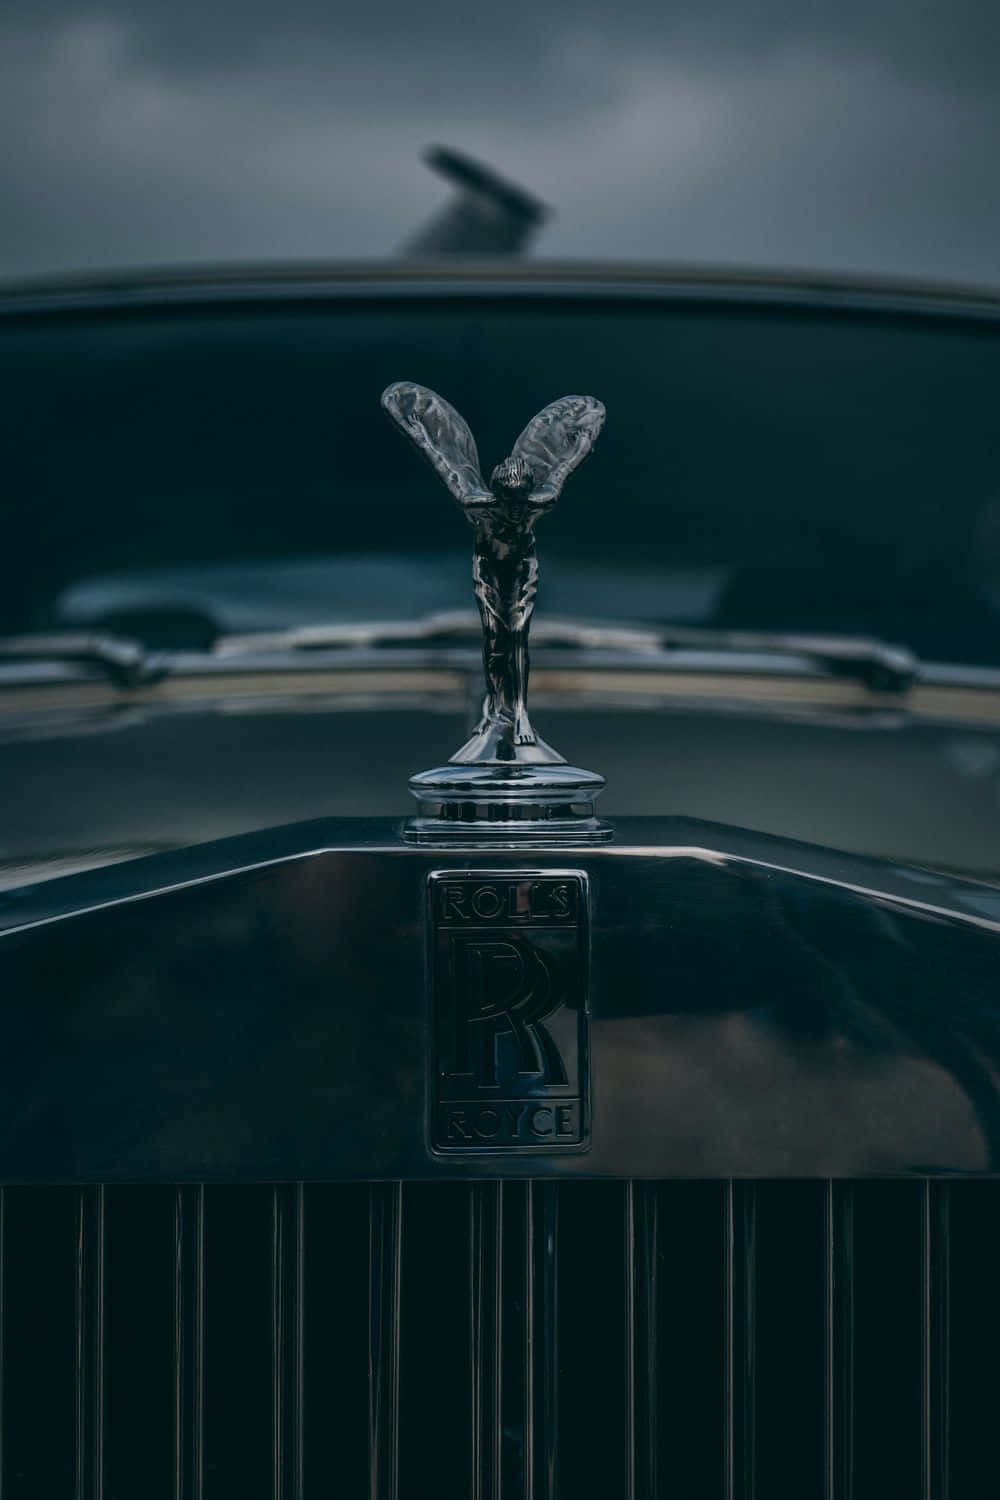 Expensive Rolls Royce Background